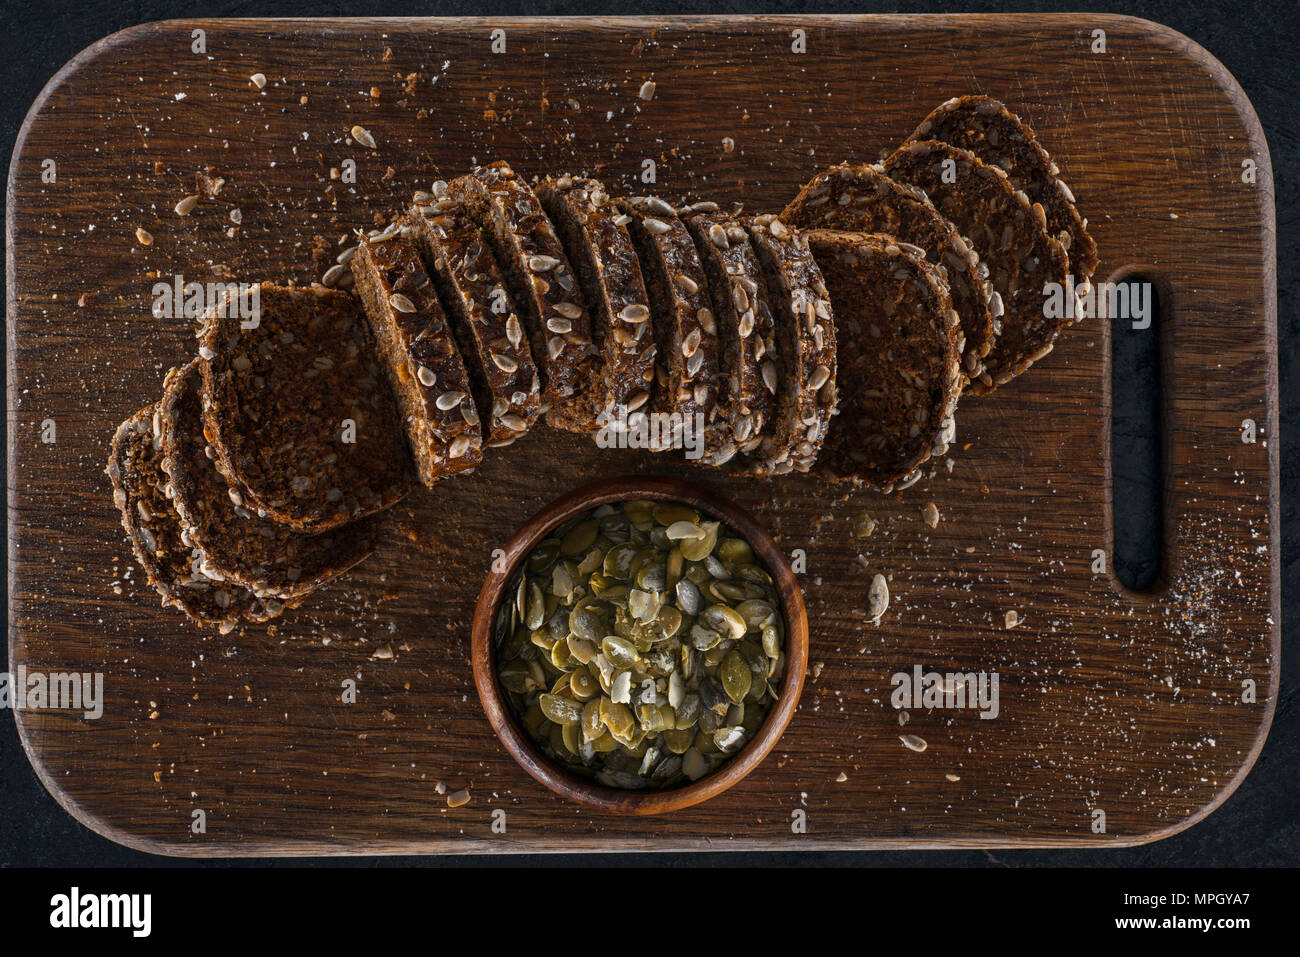 sliced bread with pumpkin seeds Stock Photo